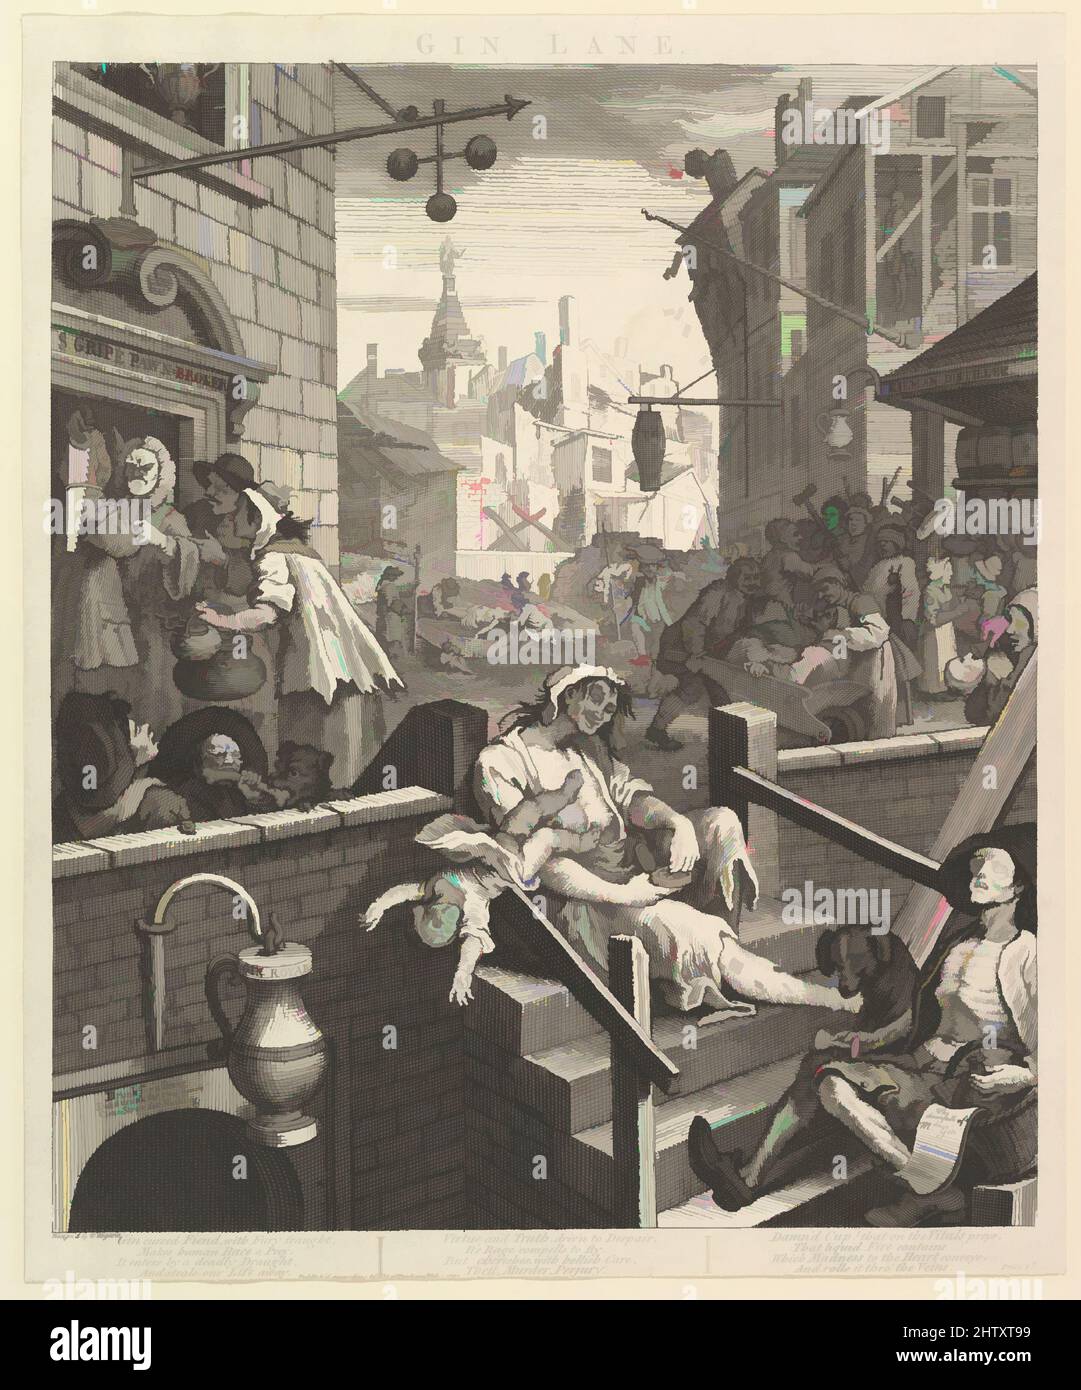 Art inspired by Gin Lane, February 1, 1751, Etching and engraving; third state of three, sheet: 15 1/16 x 12 1/2 in. (38.3 x 31.7 cm), Prints, William Hogarth (British, London 1697–1764 London, Classic works modernized by Artotop with a splash of modernity. Shapes, color and value, eye-catching visual impact on art. Emotions through freedom of artworks in a contemporary way. A timeless message pursuing a wildly creative new direction. Artists turning to the digital medium and creating the Artotop NFT Stock Photo